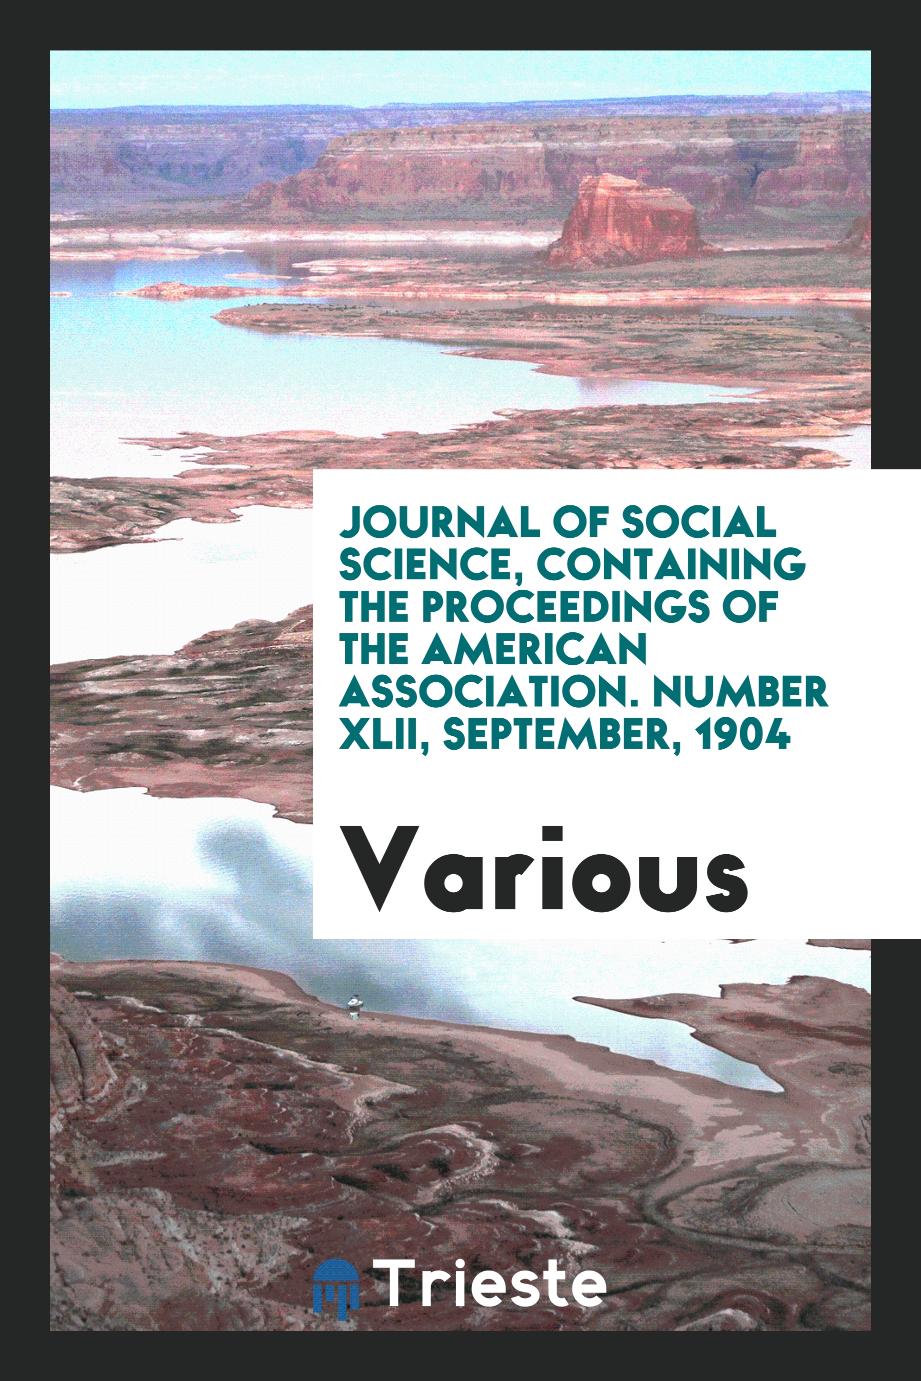 Journal of social science, containing the proceedings of the American Association. Number XLII, September, 1904